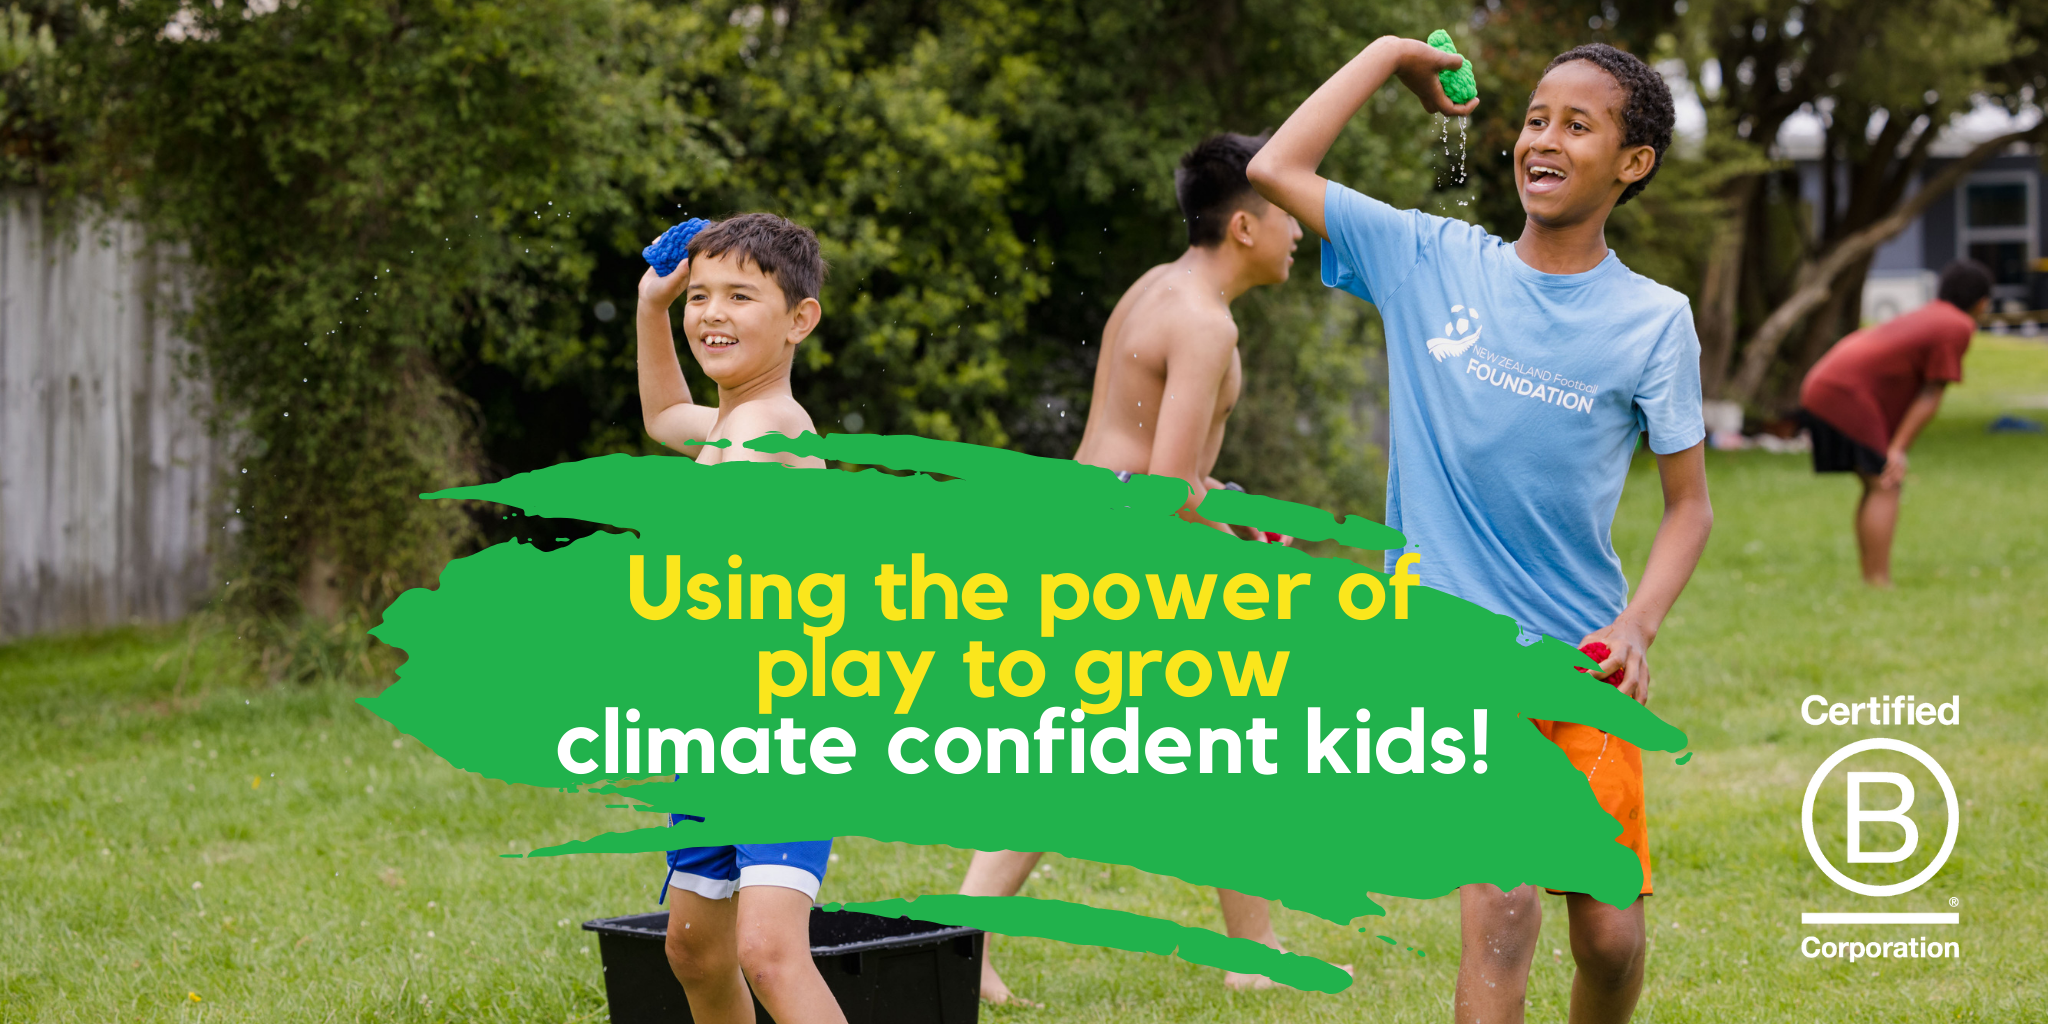 Two boys standing in a park laughing and throwing EcoSplat Reusable Water Balloons. There are two more boys in the background. Text says "Using the power of play to grow climate confident kids!" The 'Certified B Corporation" logo is in the bottom right hand corner.